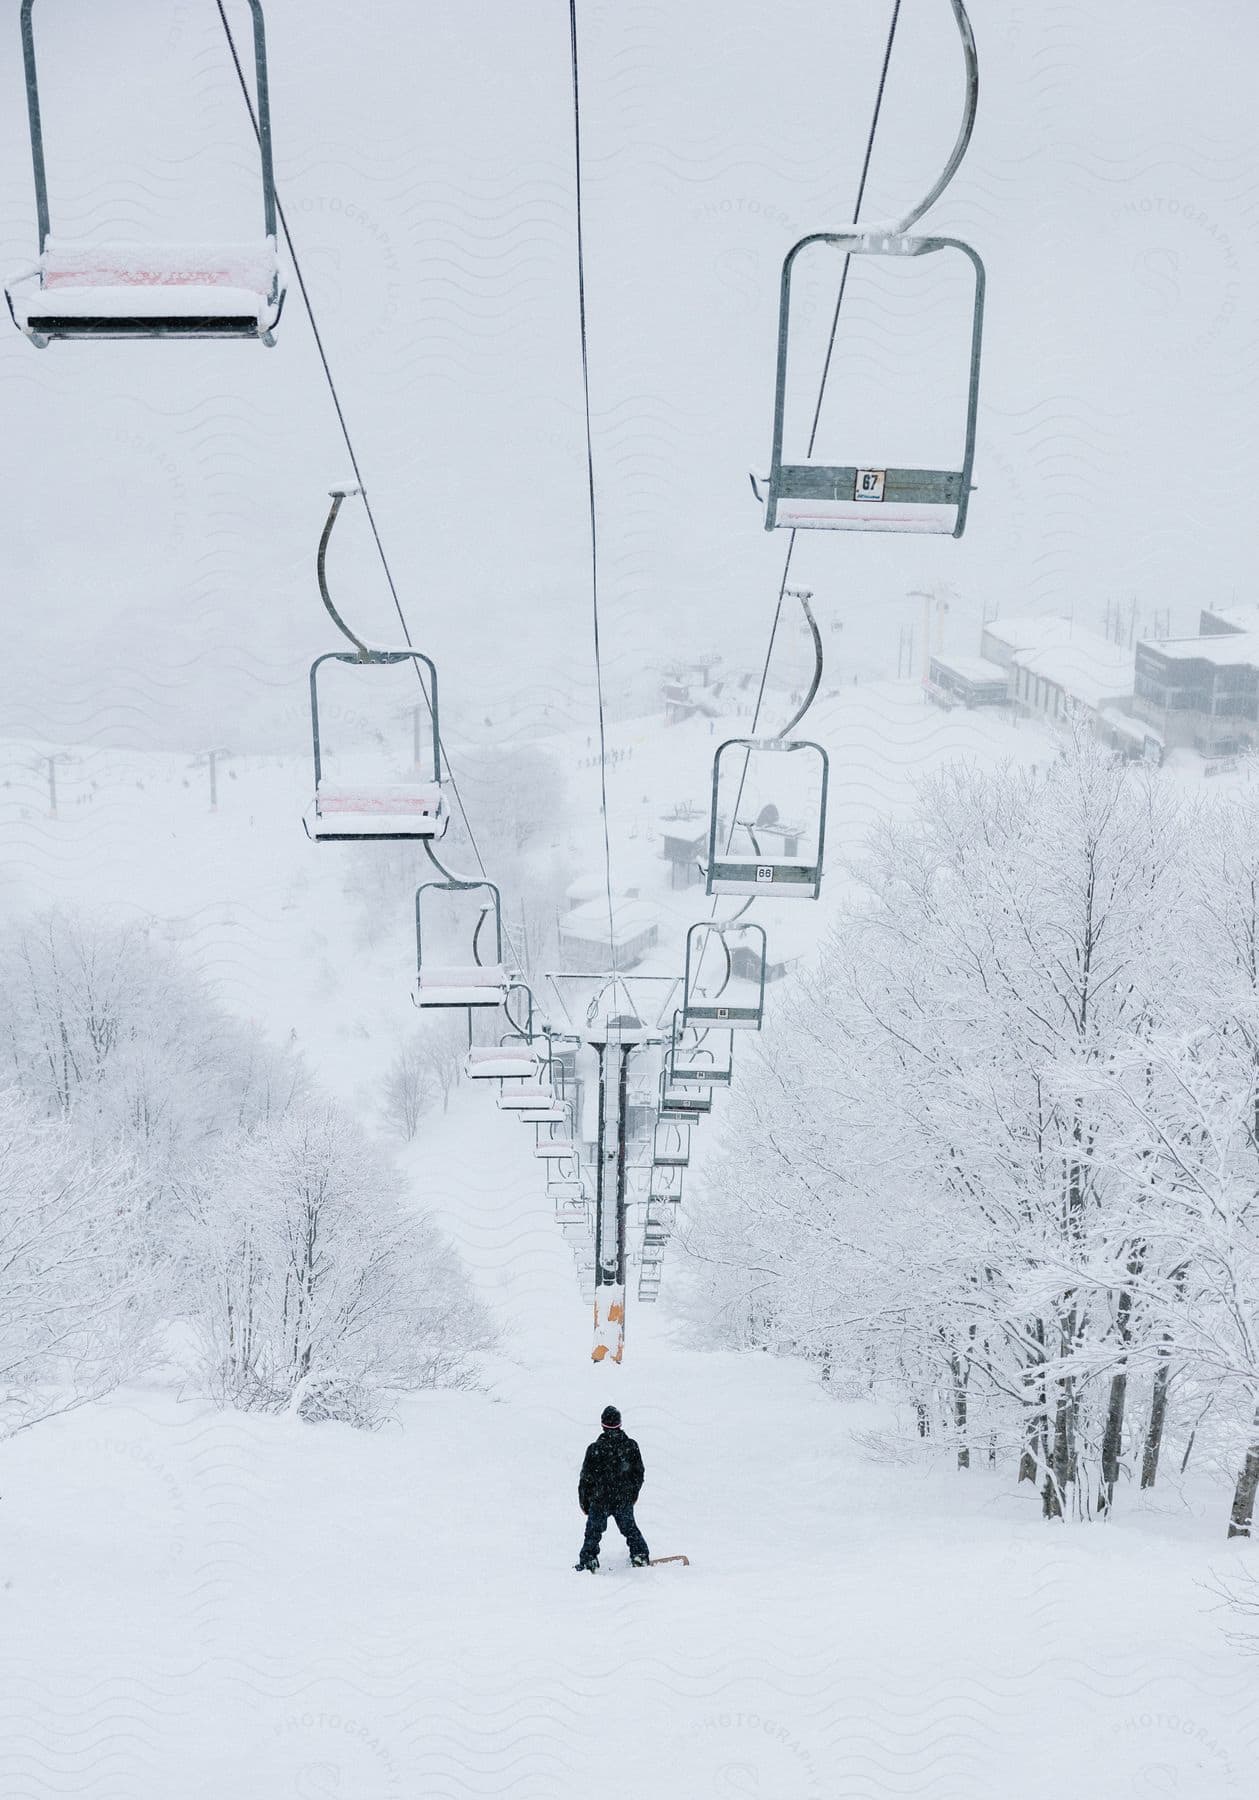 A snowboarder stands beneath a ski lift on a snowy ski slope